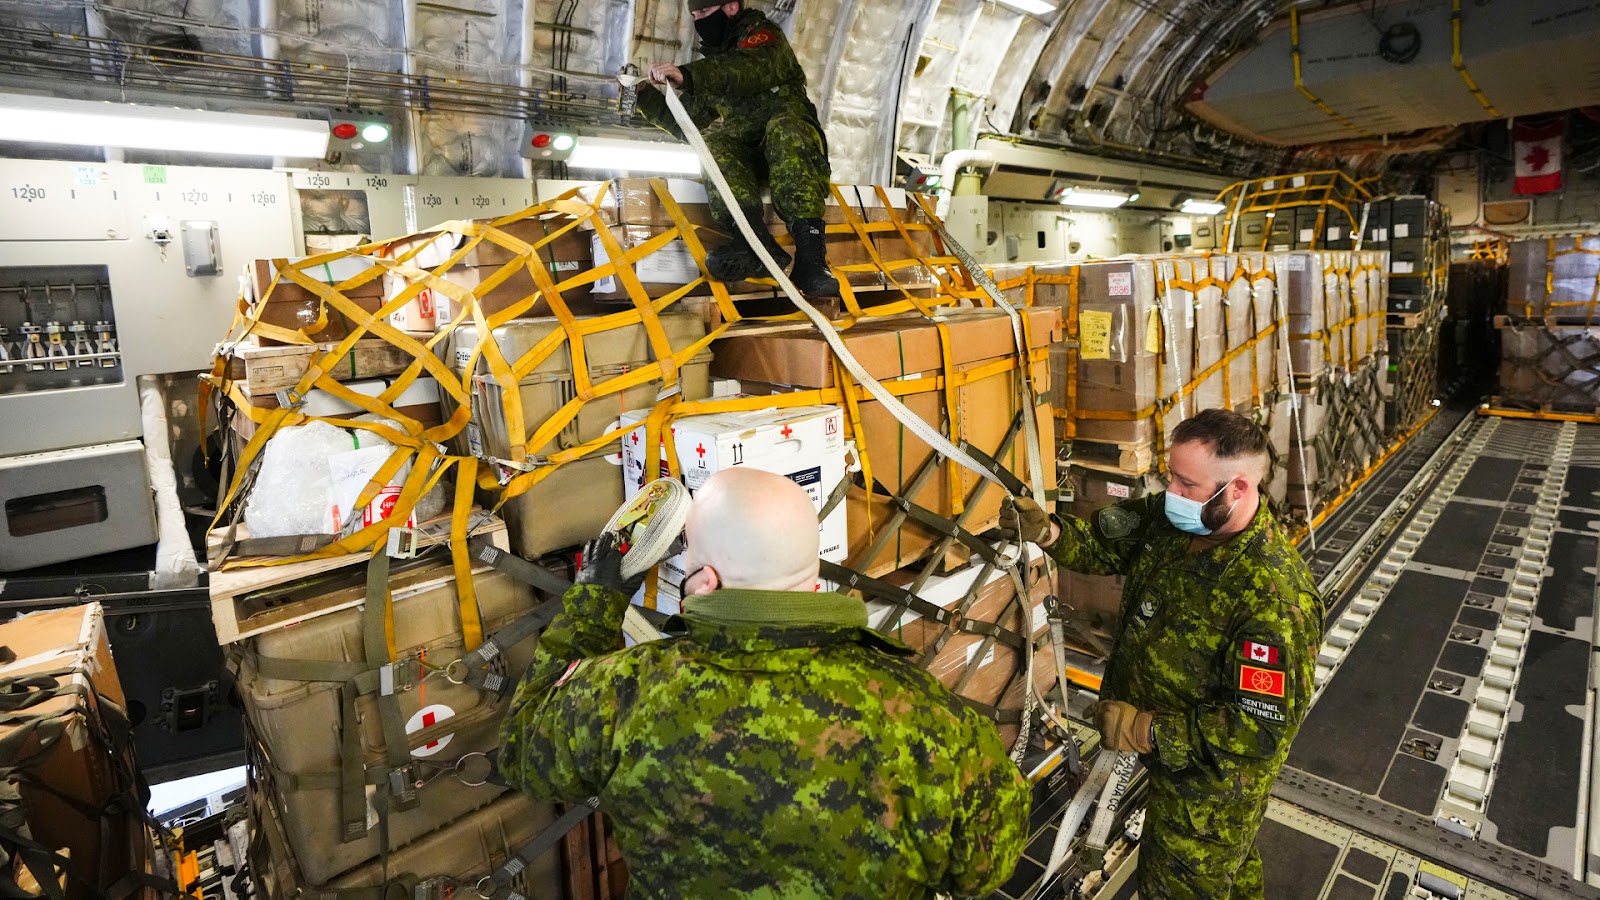 Ukraine to get more military aid from Canada - Asiana Times